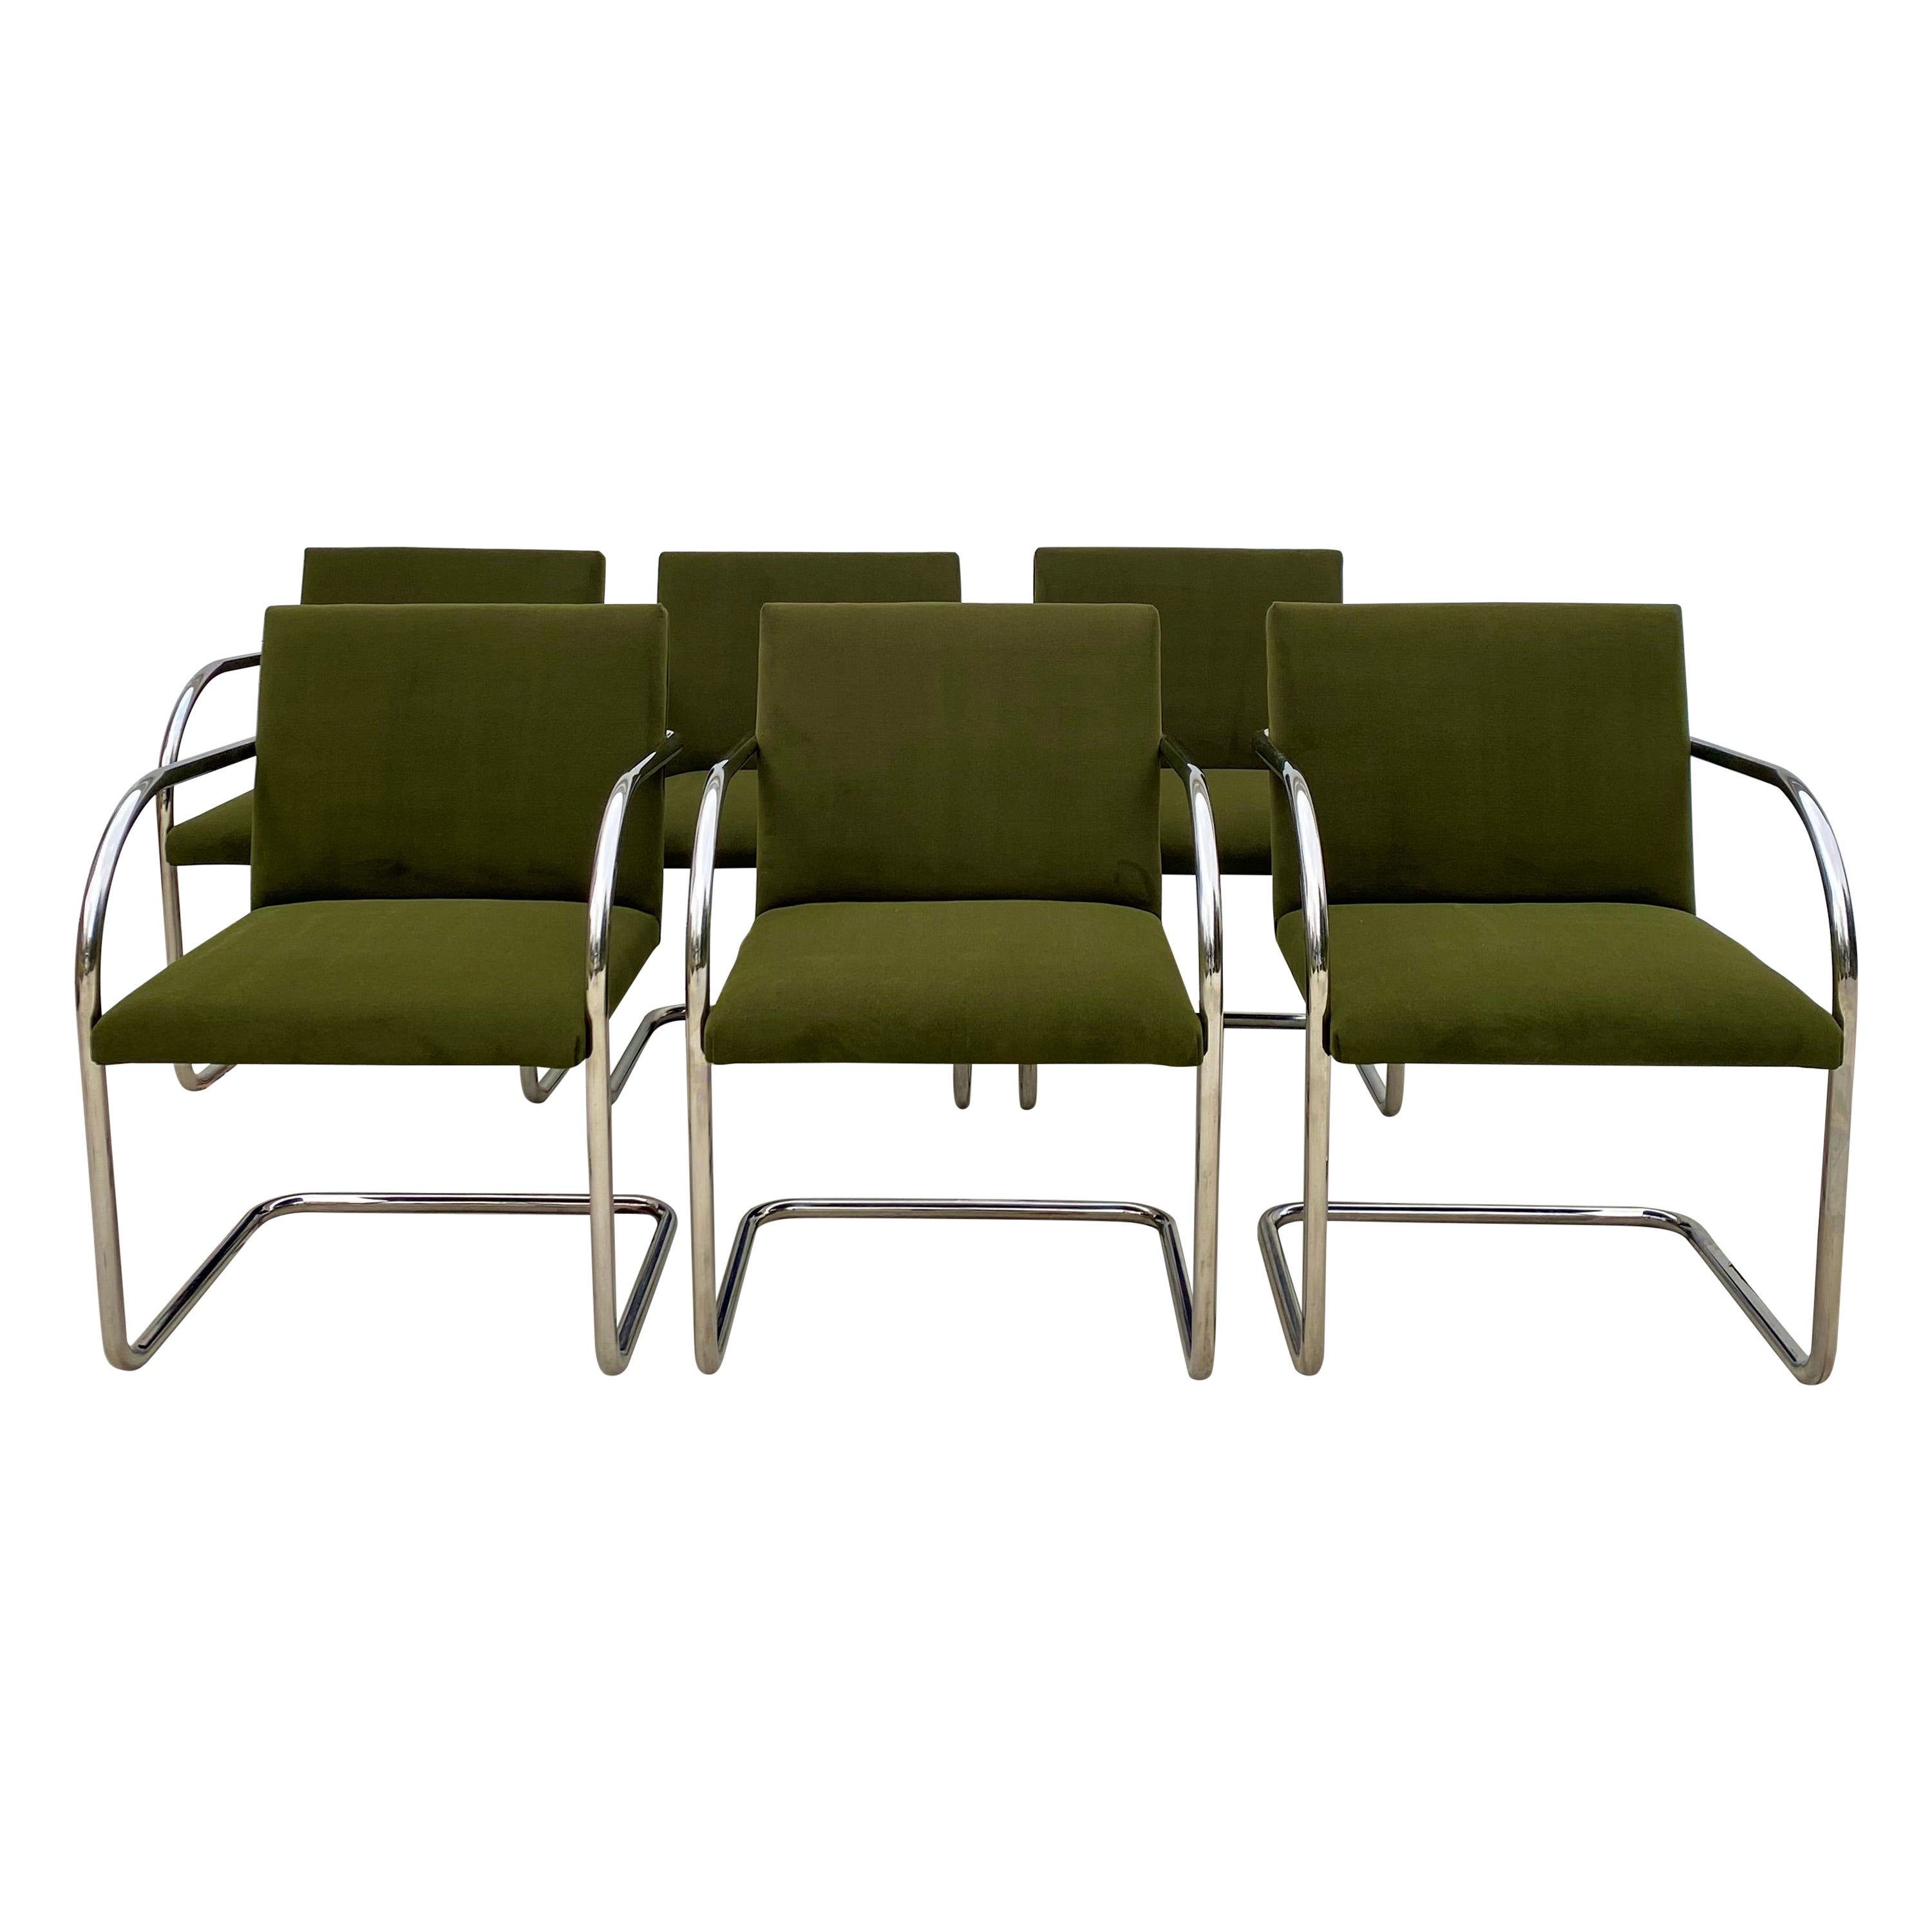 Set of 6 Chrome Mies Van Der Rohe Tubular Brno Chairs by Knoll in Green Velvet For Sale